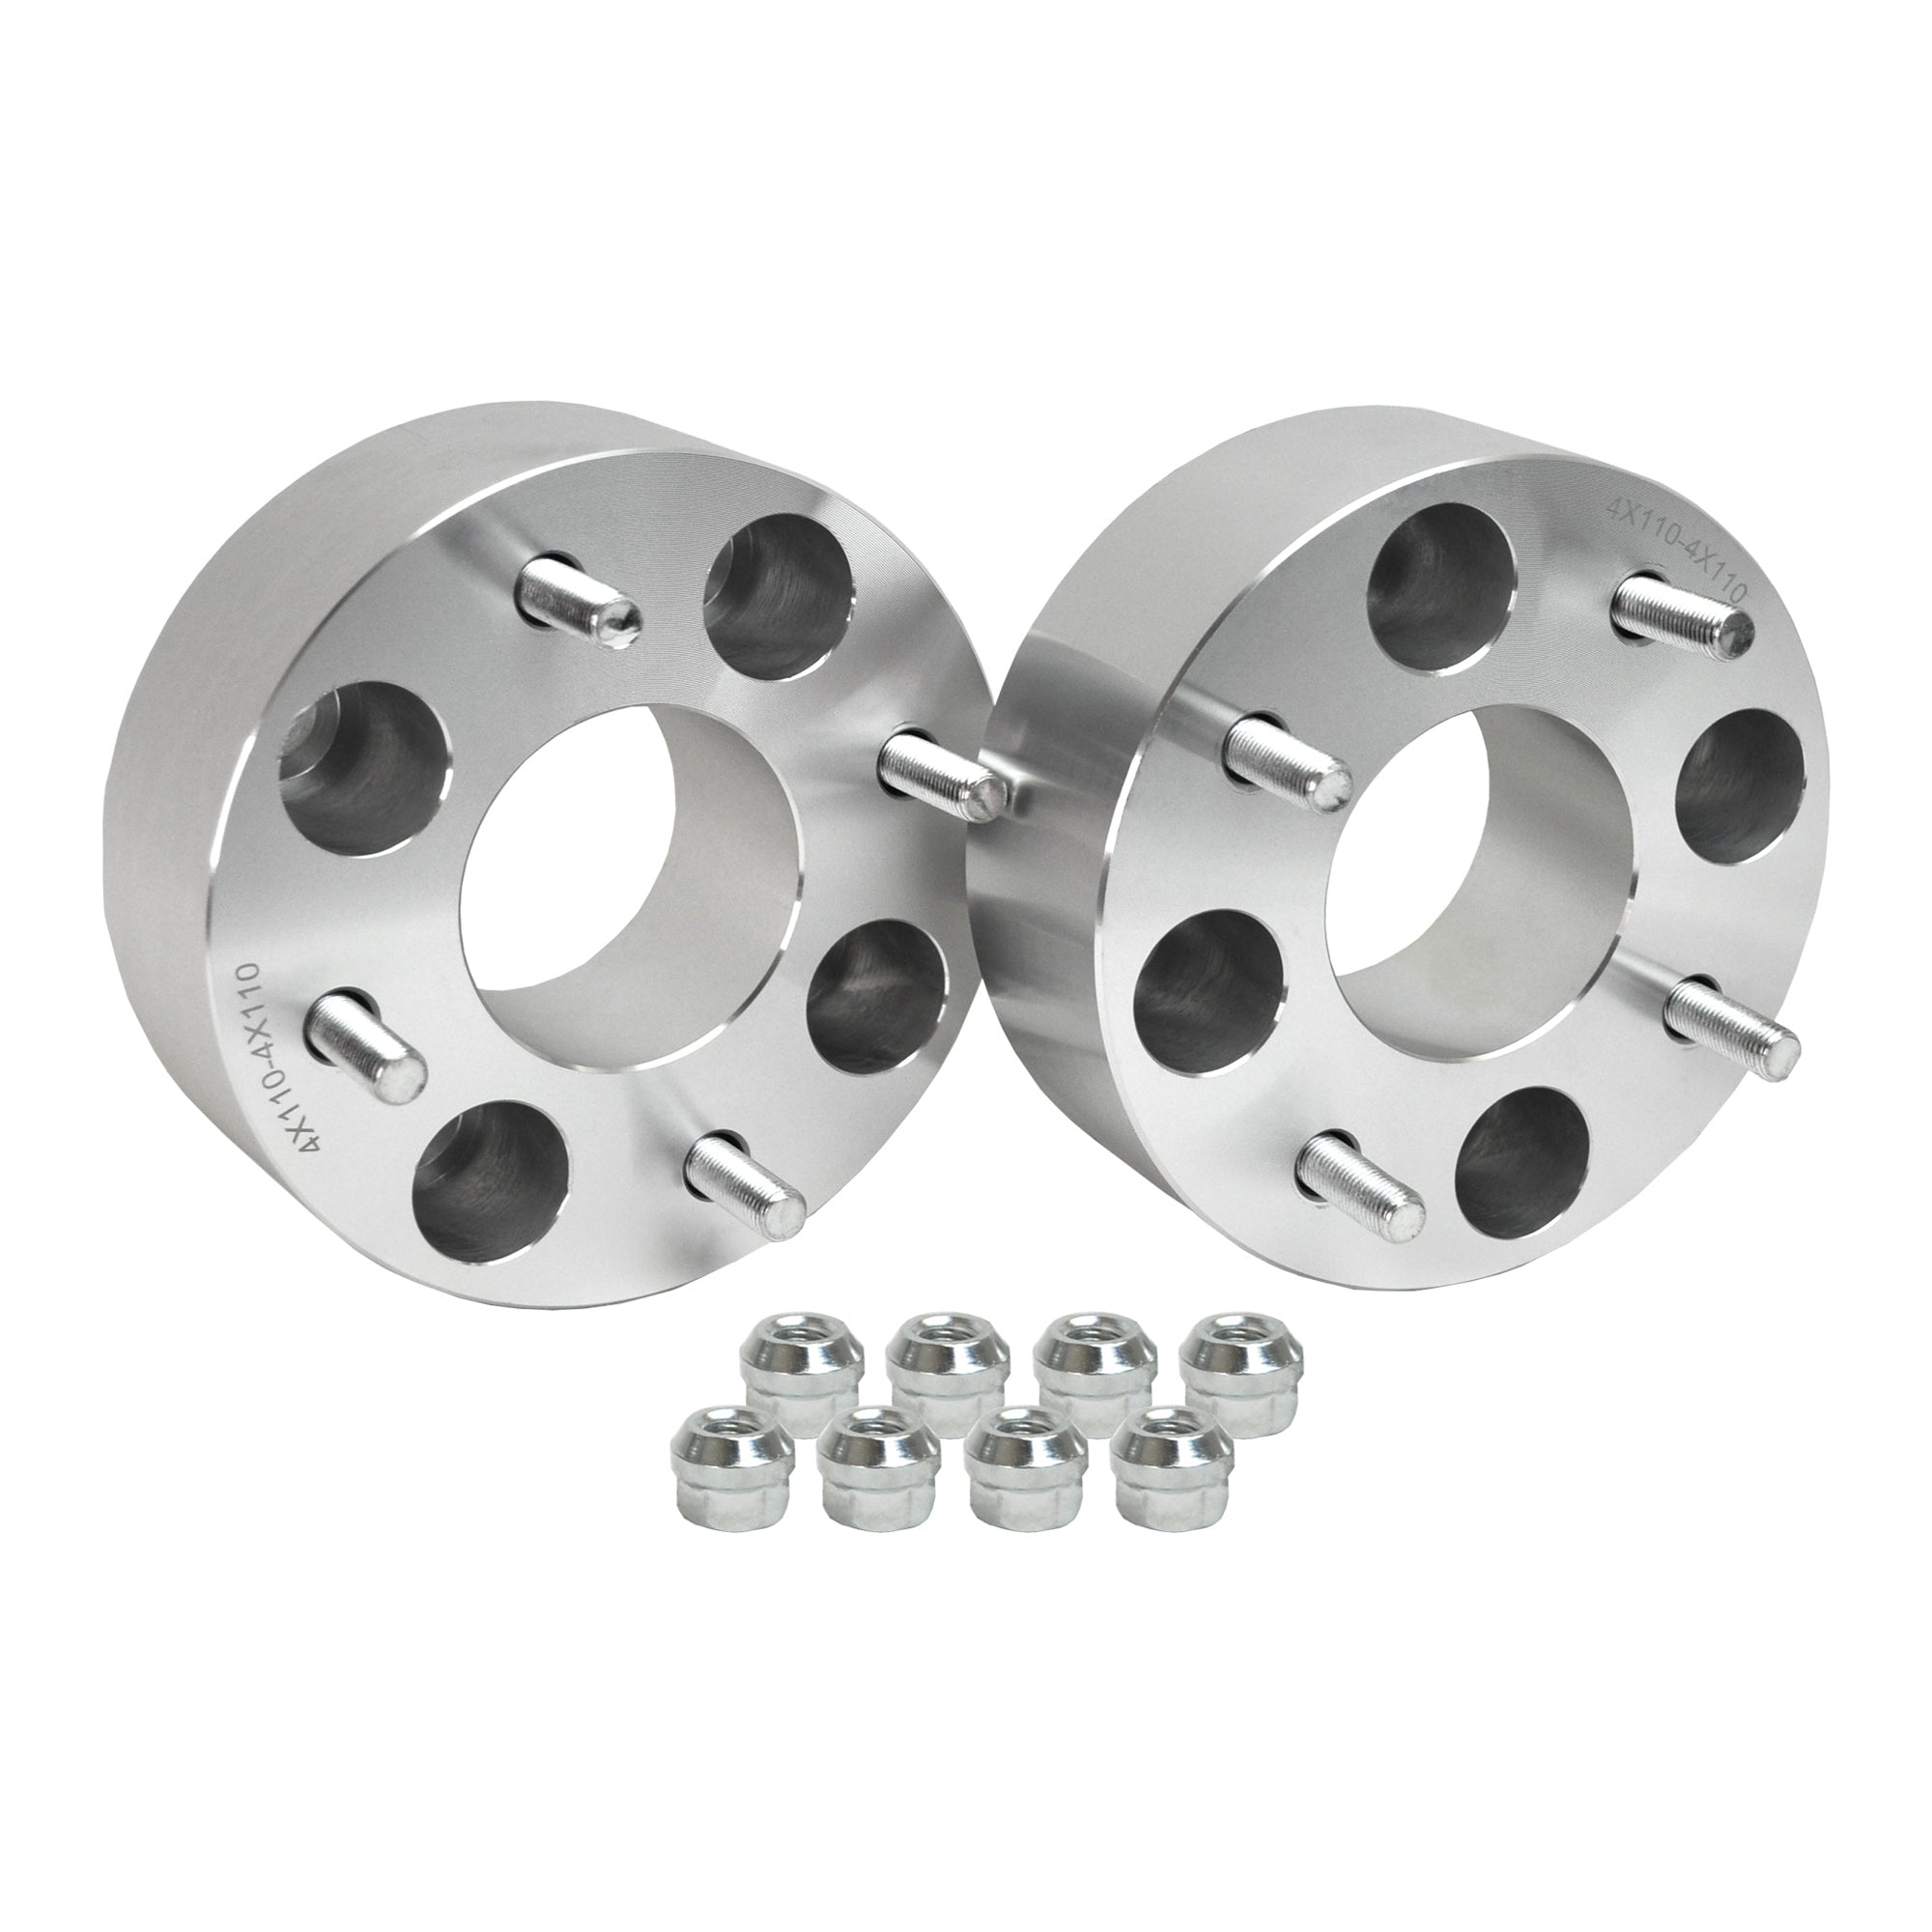 Wheel Spacer for Yamaha Grizzly 550 